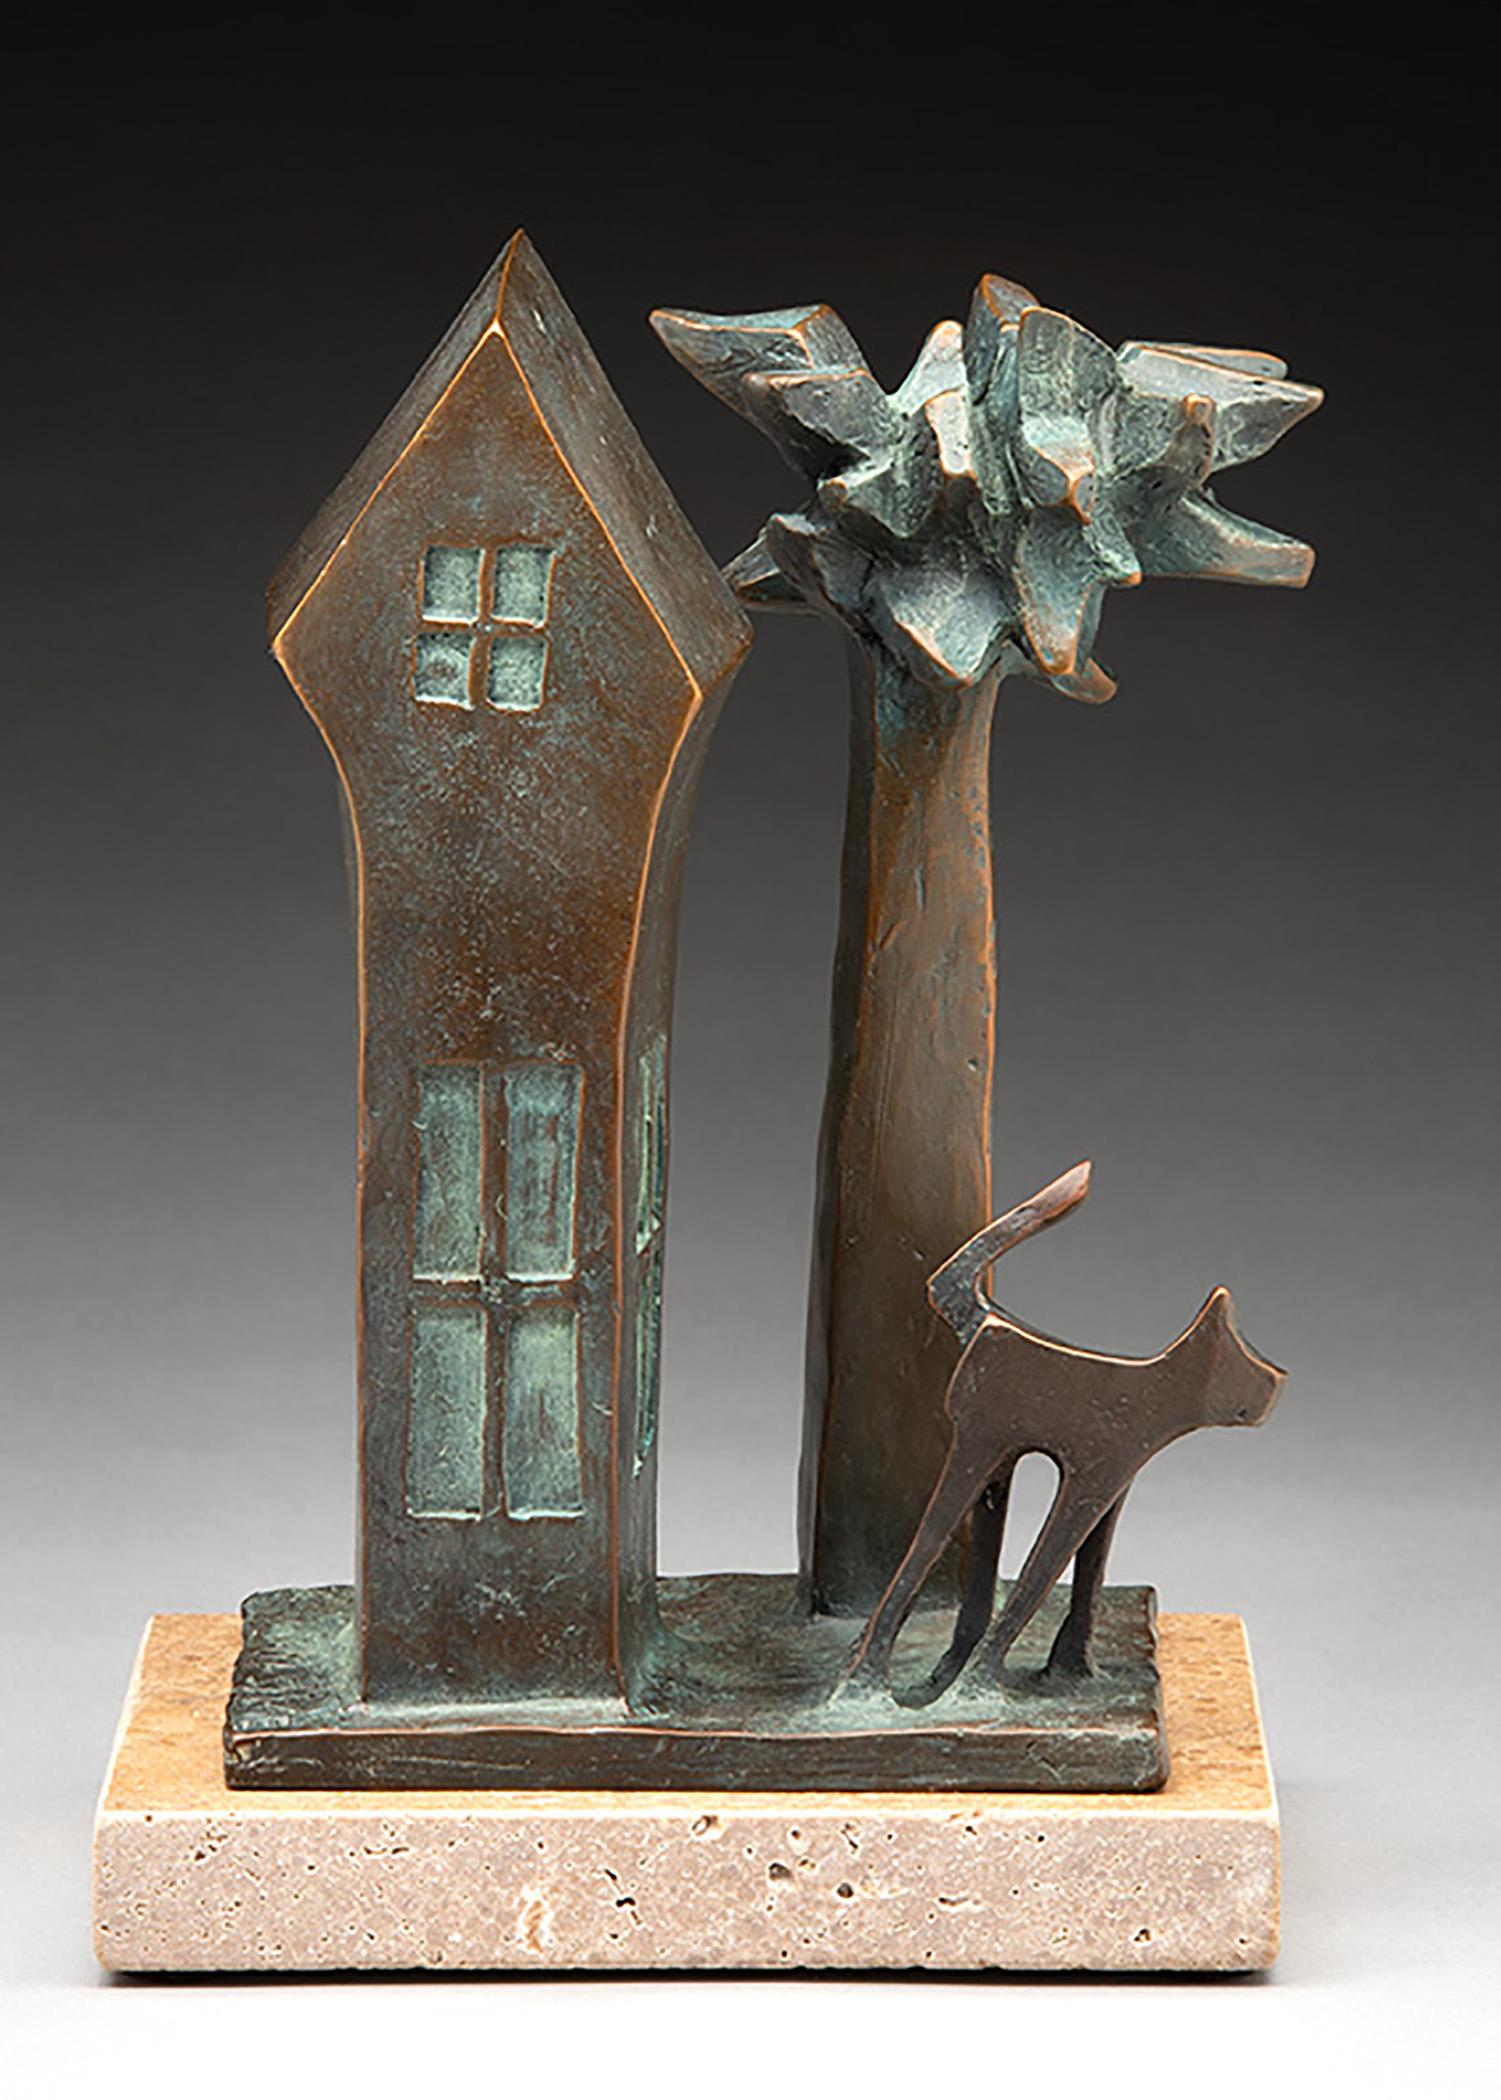 Wayne Salge Abstract Sculpture - "Cabin Fever 3" Bronze cast mini sculpture of a house with tree and cat, Cubism 